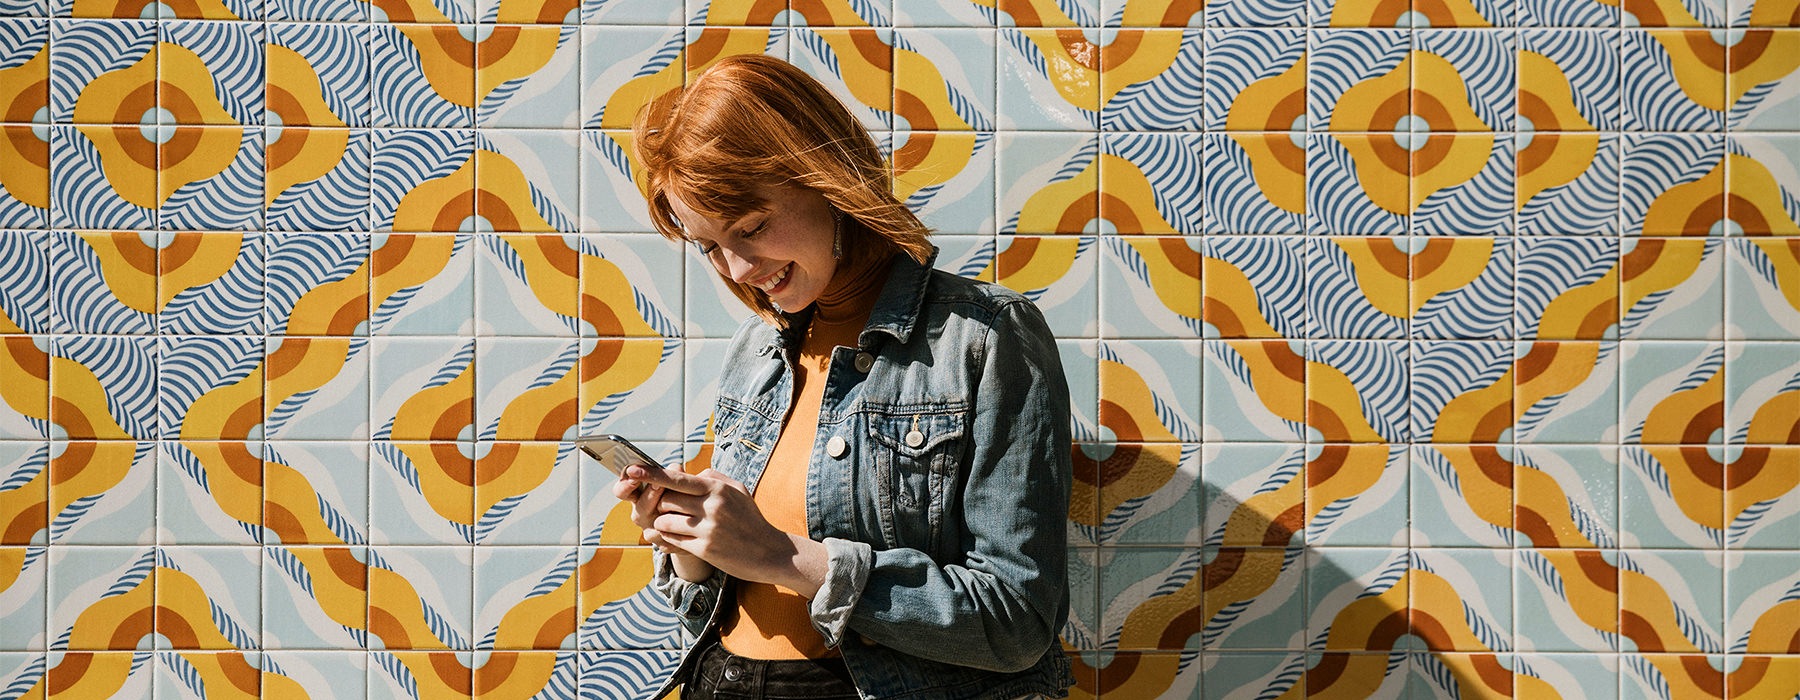 woman in front of wall on phone